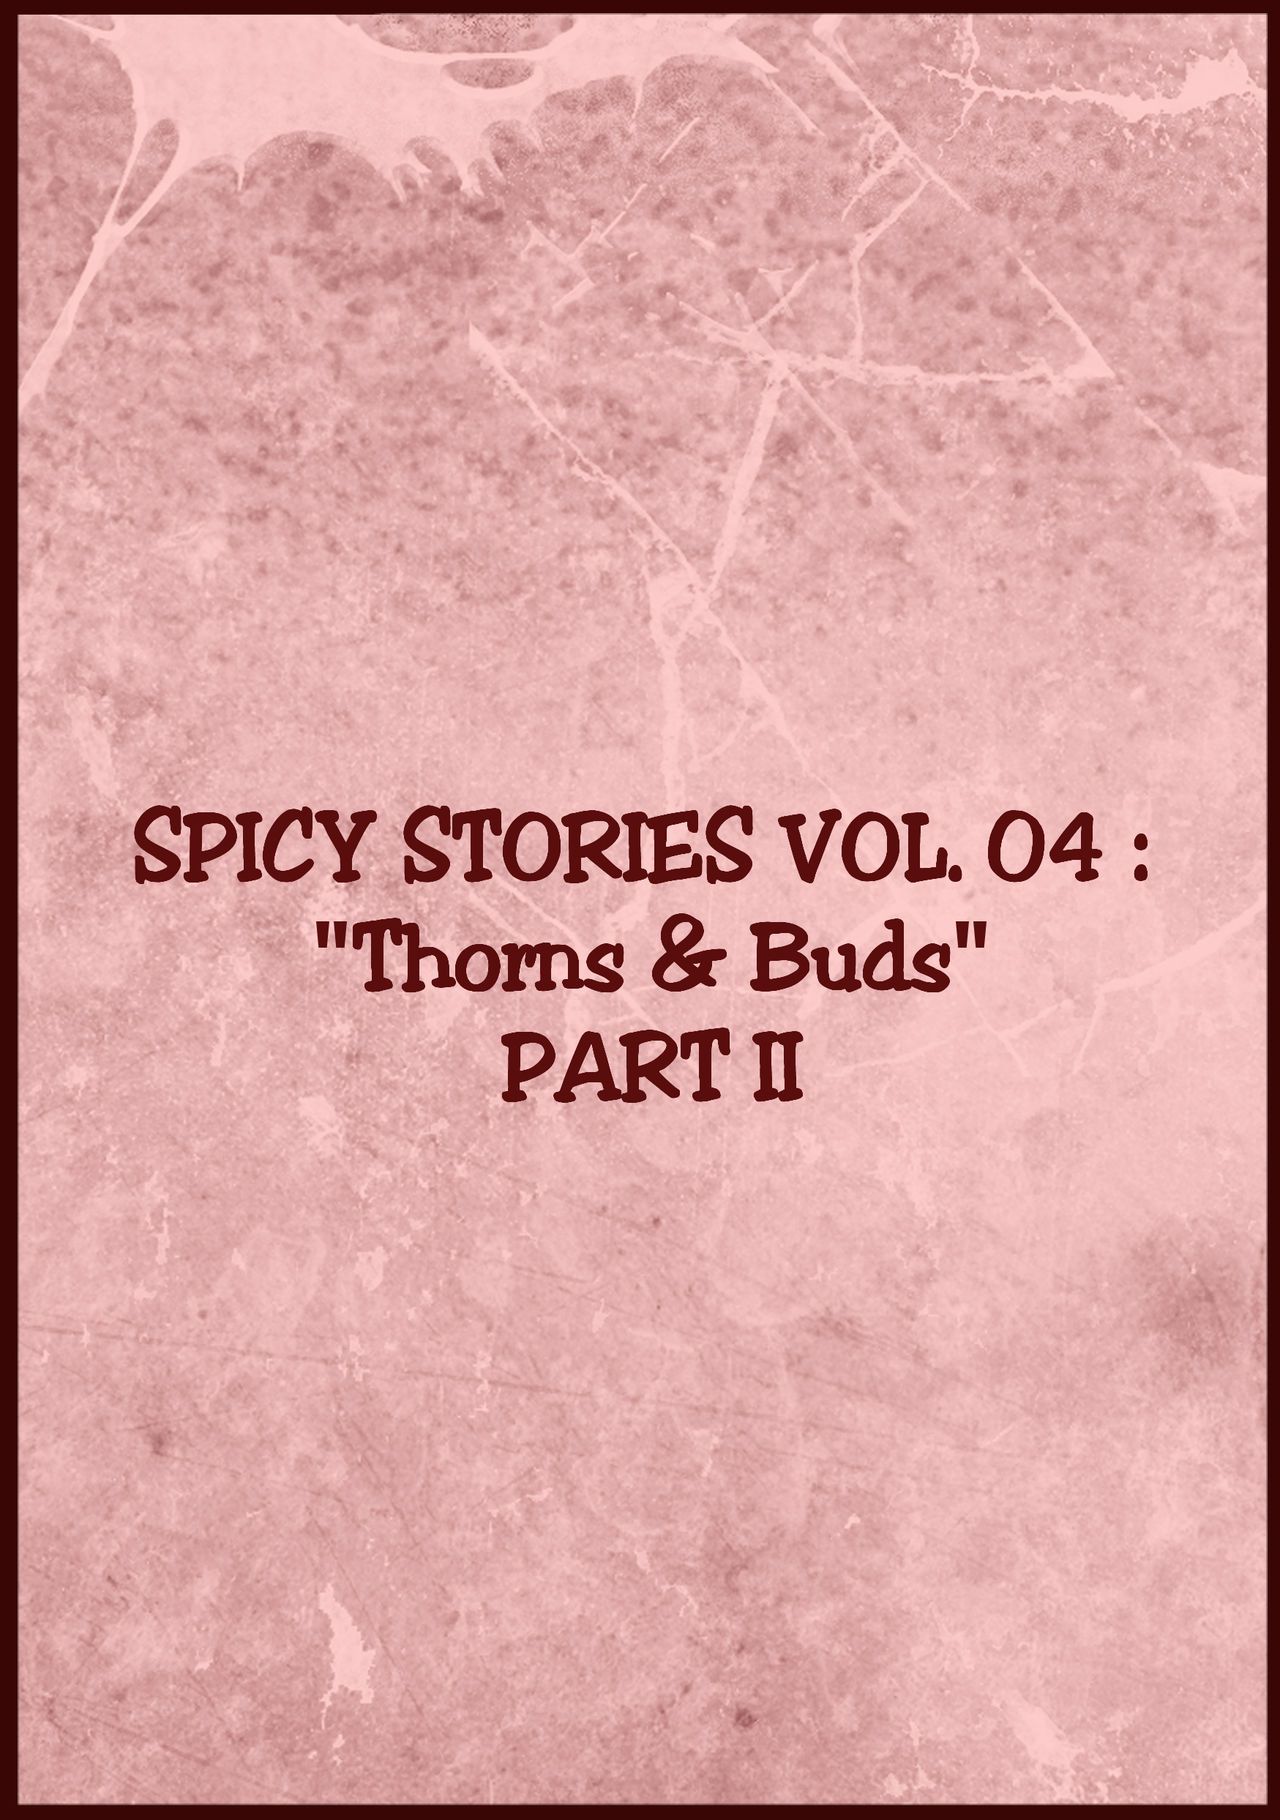 NGT Spicy Stories 04 - Thorns & Buds (English) (Ongoing) NGT Spicy Stories 04 - Thorns & Buds 39